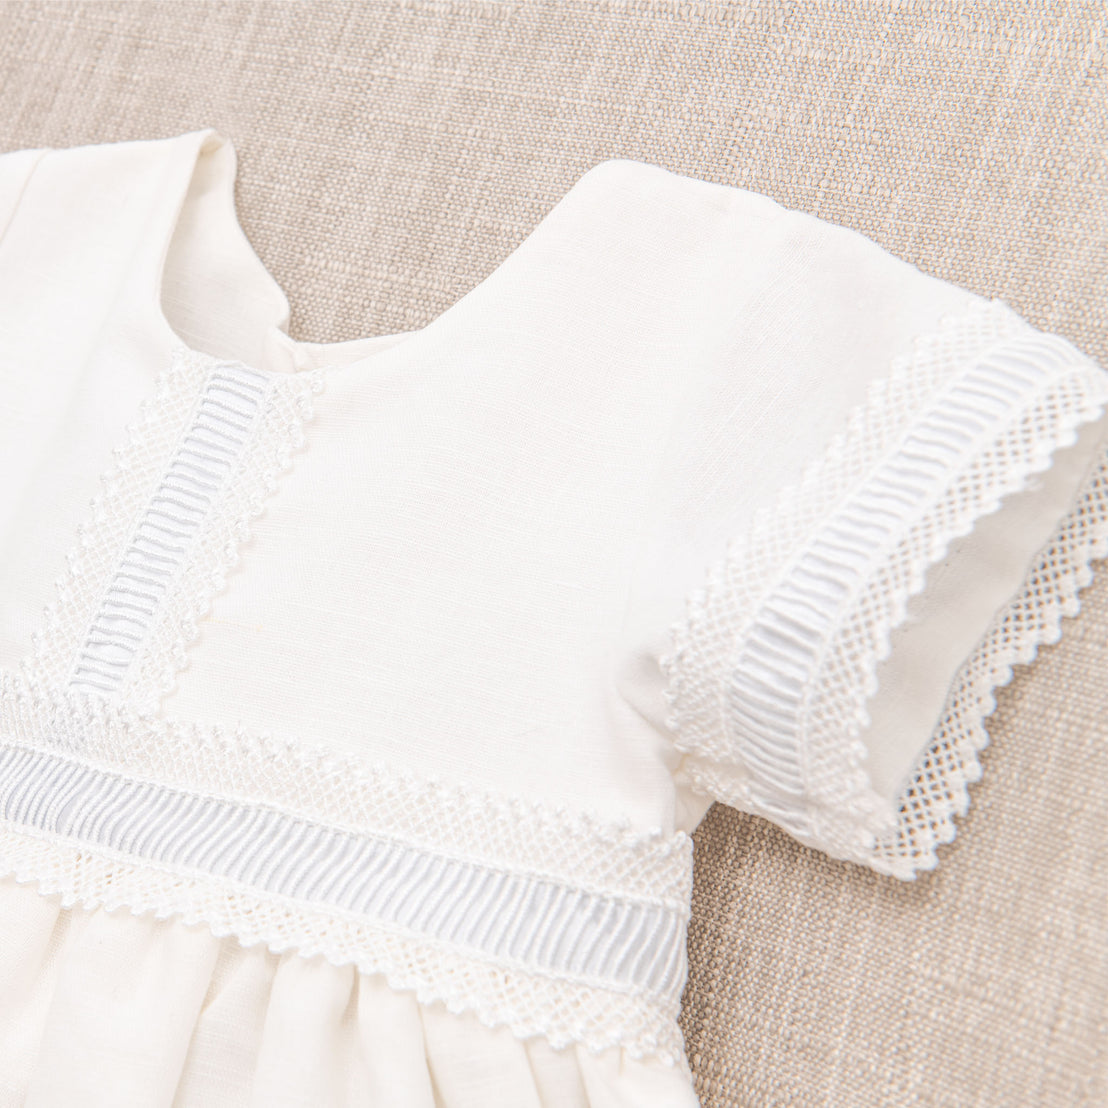 Close up photograph of the trim details on the Rowan linen boys baptism gown.